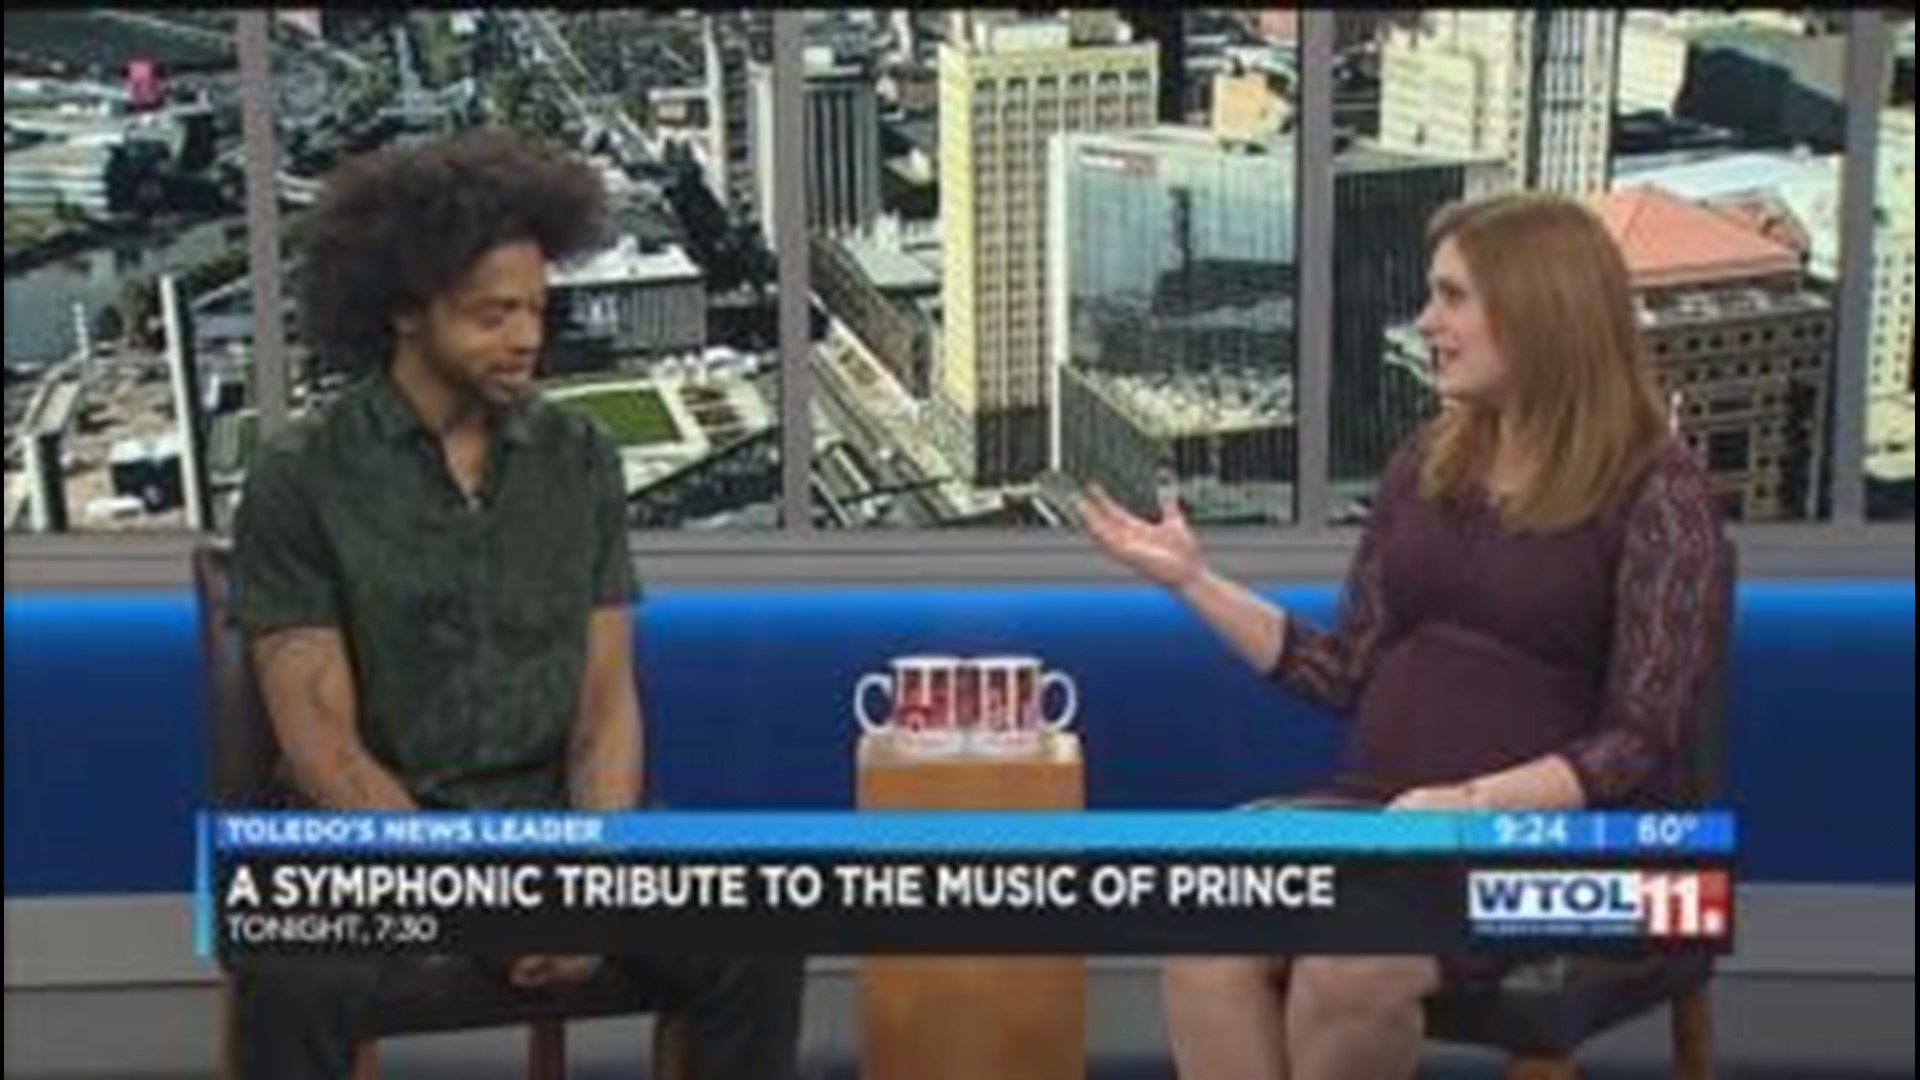 Former members of Prince's 'New Power Generation' to host Prince tribute concert at Promenade Park